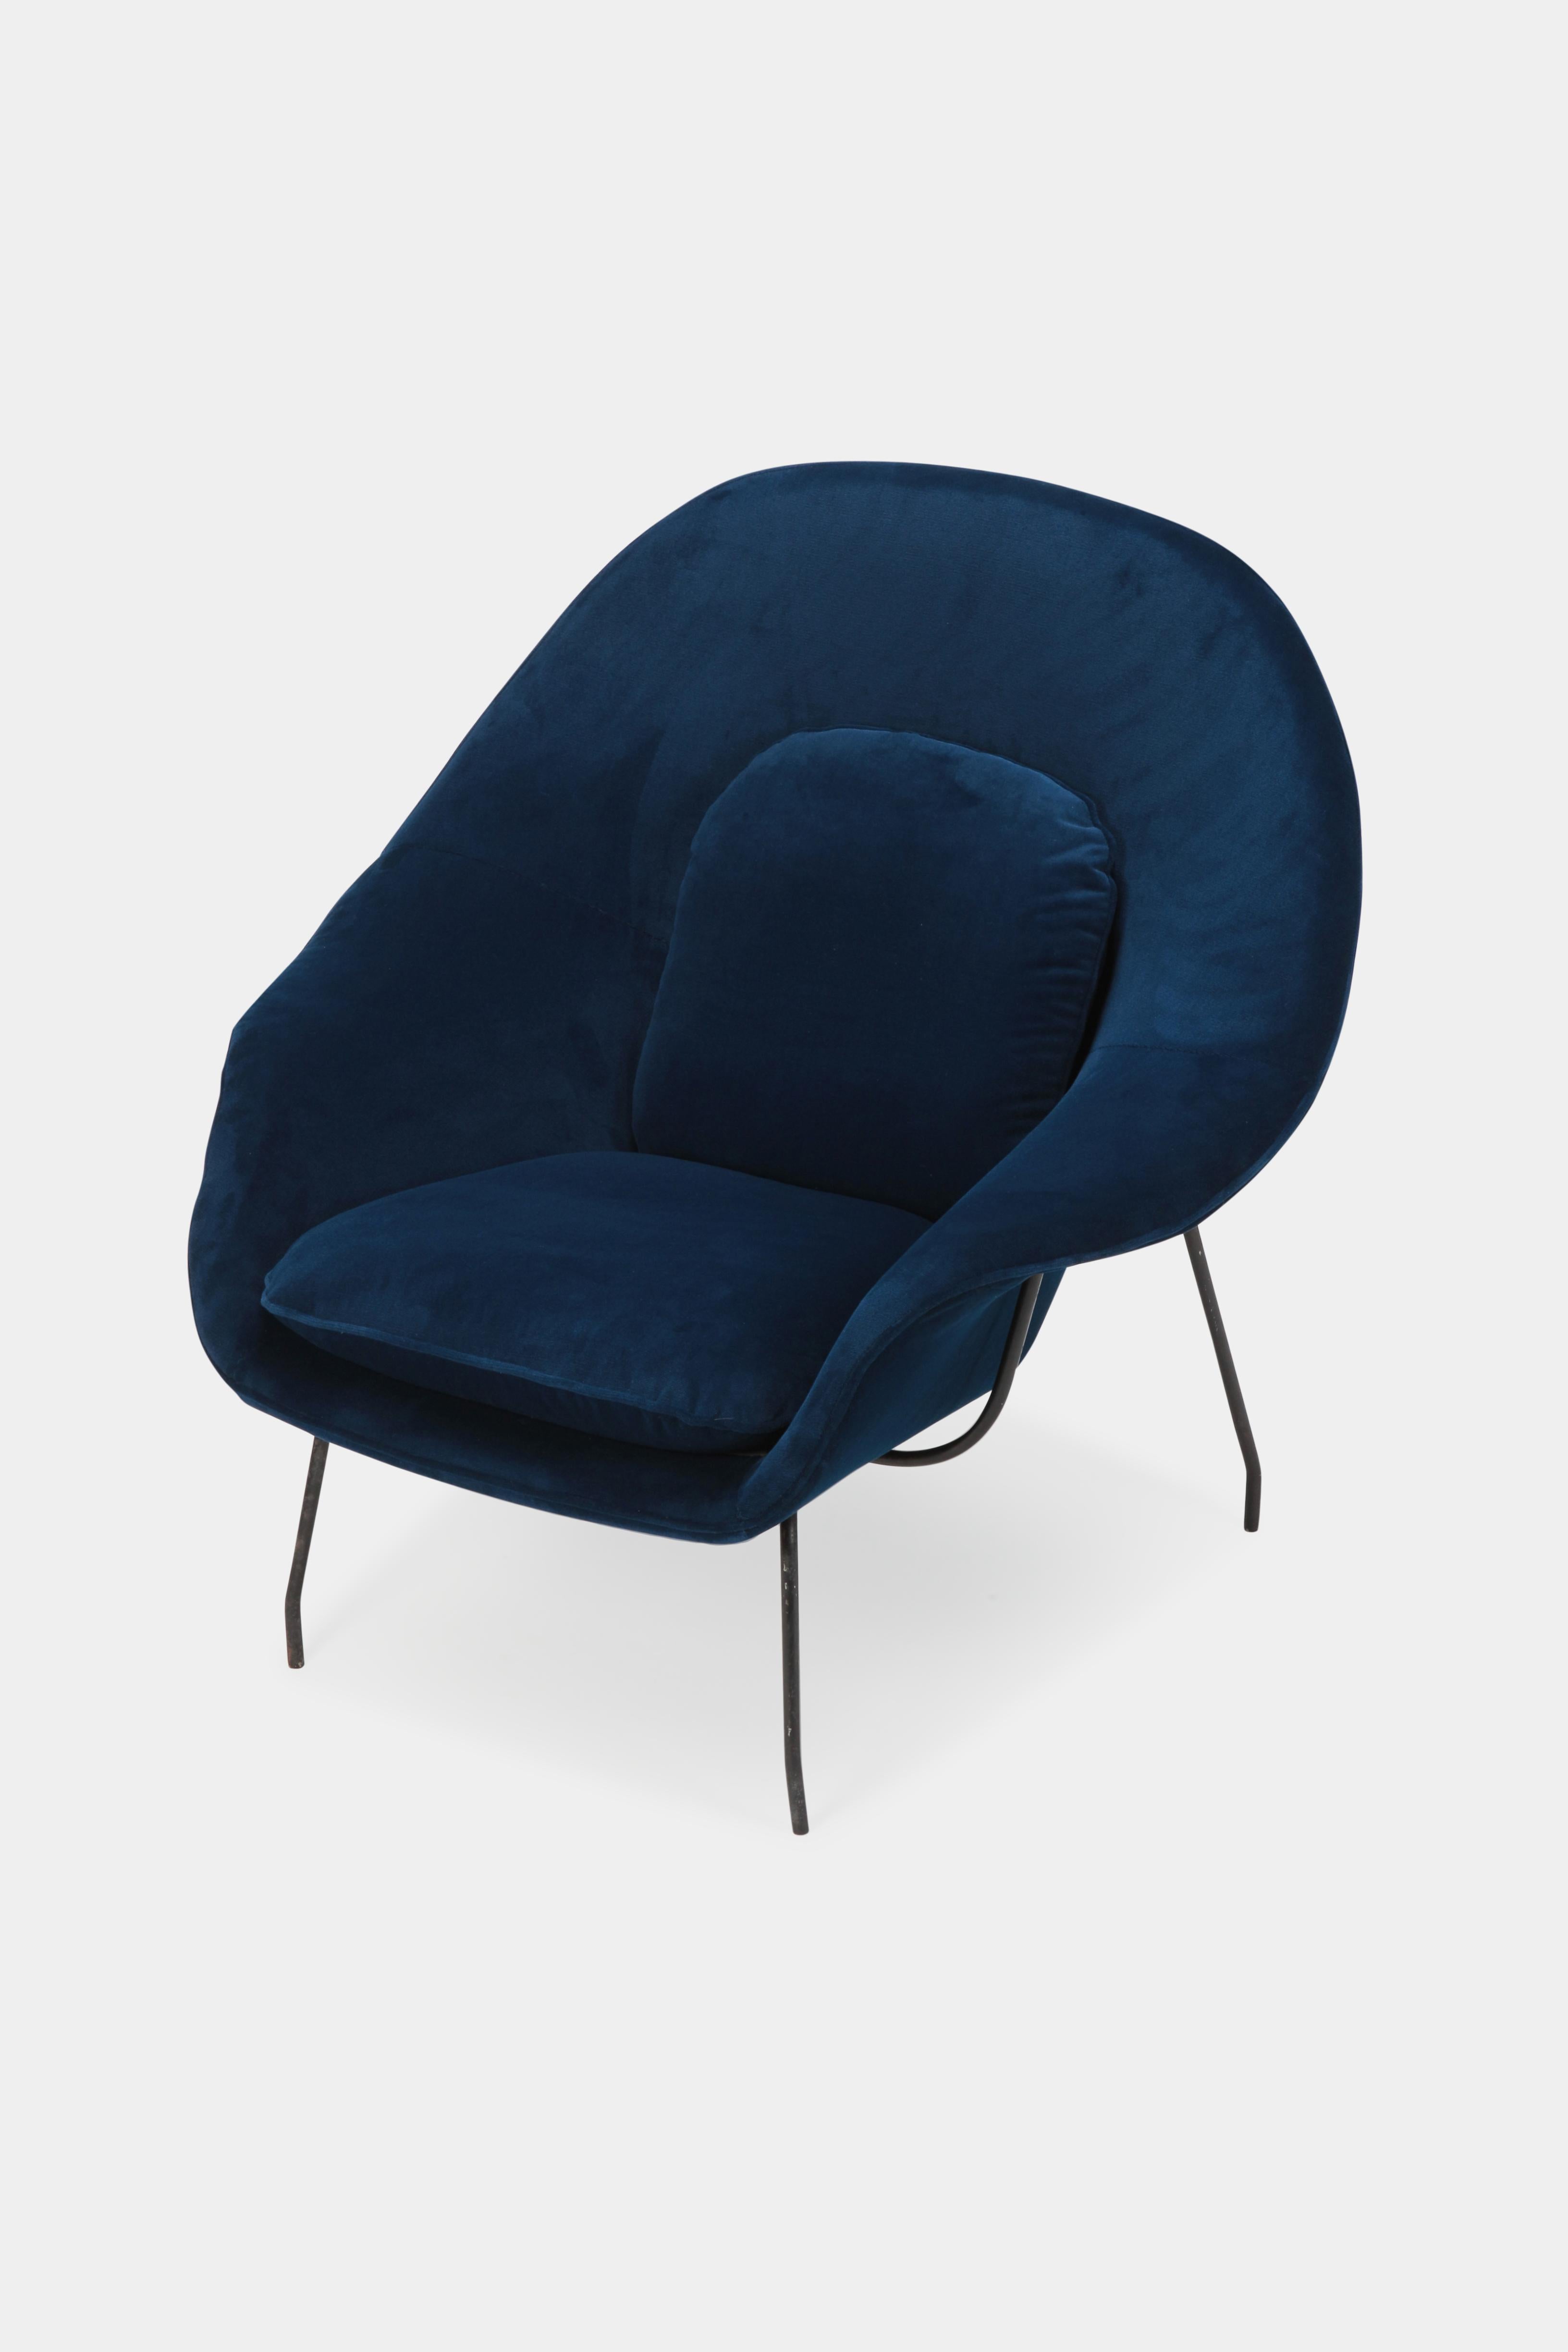 Description
Eero Saarinen Womb Chair manufactured by Knoll International in the 1950’s in Denmark. Cushions and frame are newly covered in a blue velvet fabric. Stands on a black lacquered steel base with patina.